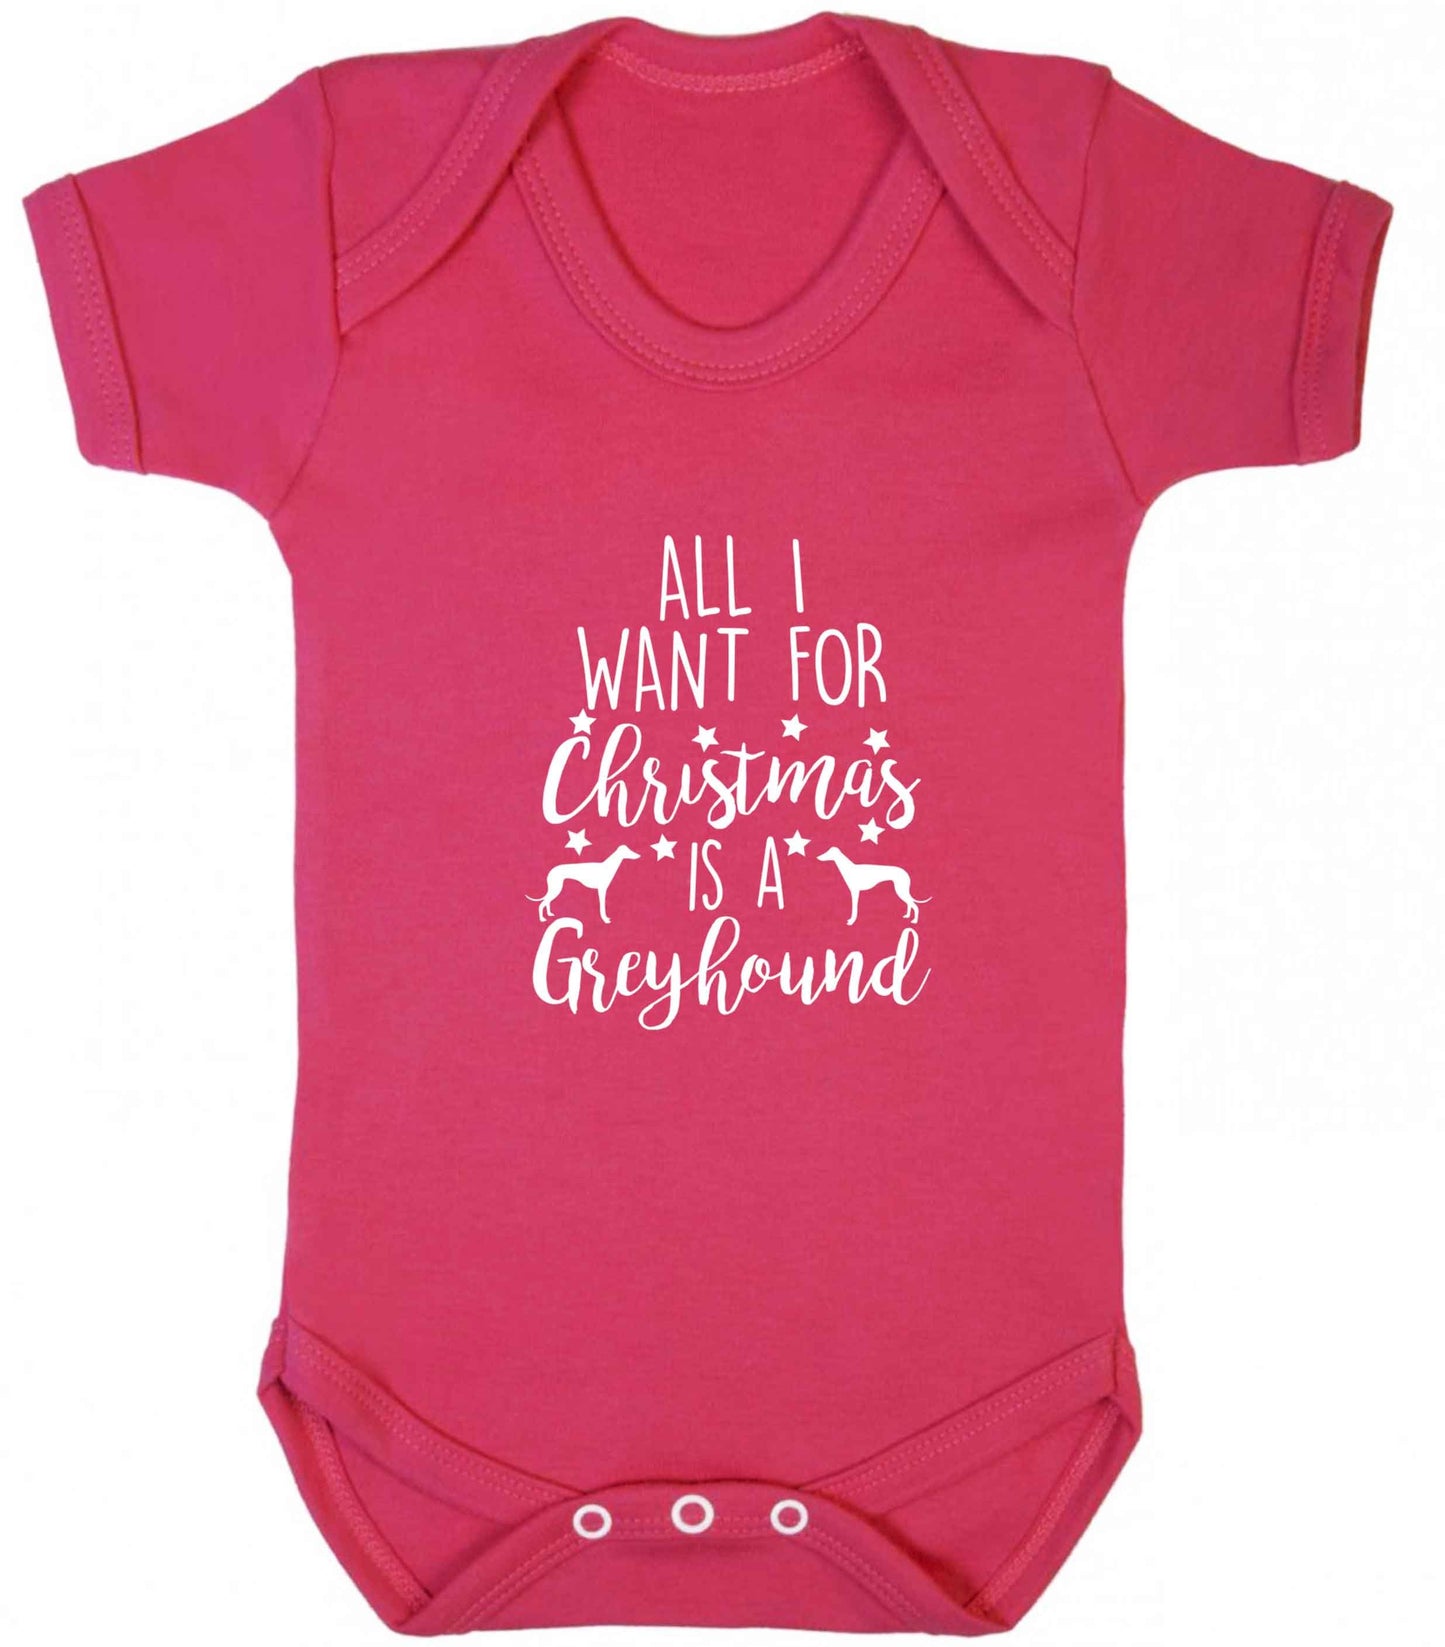 All I want for Christmas is a greyhound baby vest dark pink 18-24 months